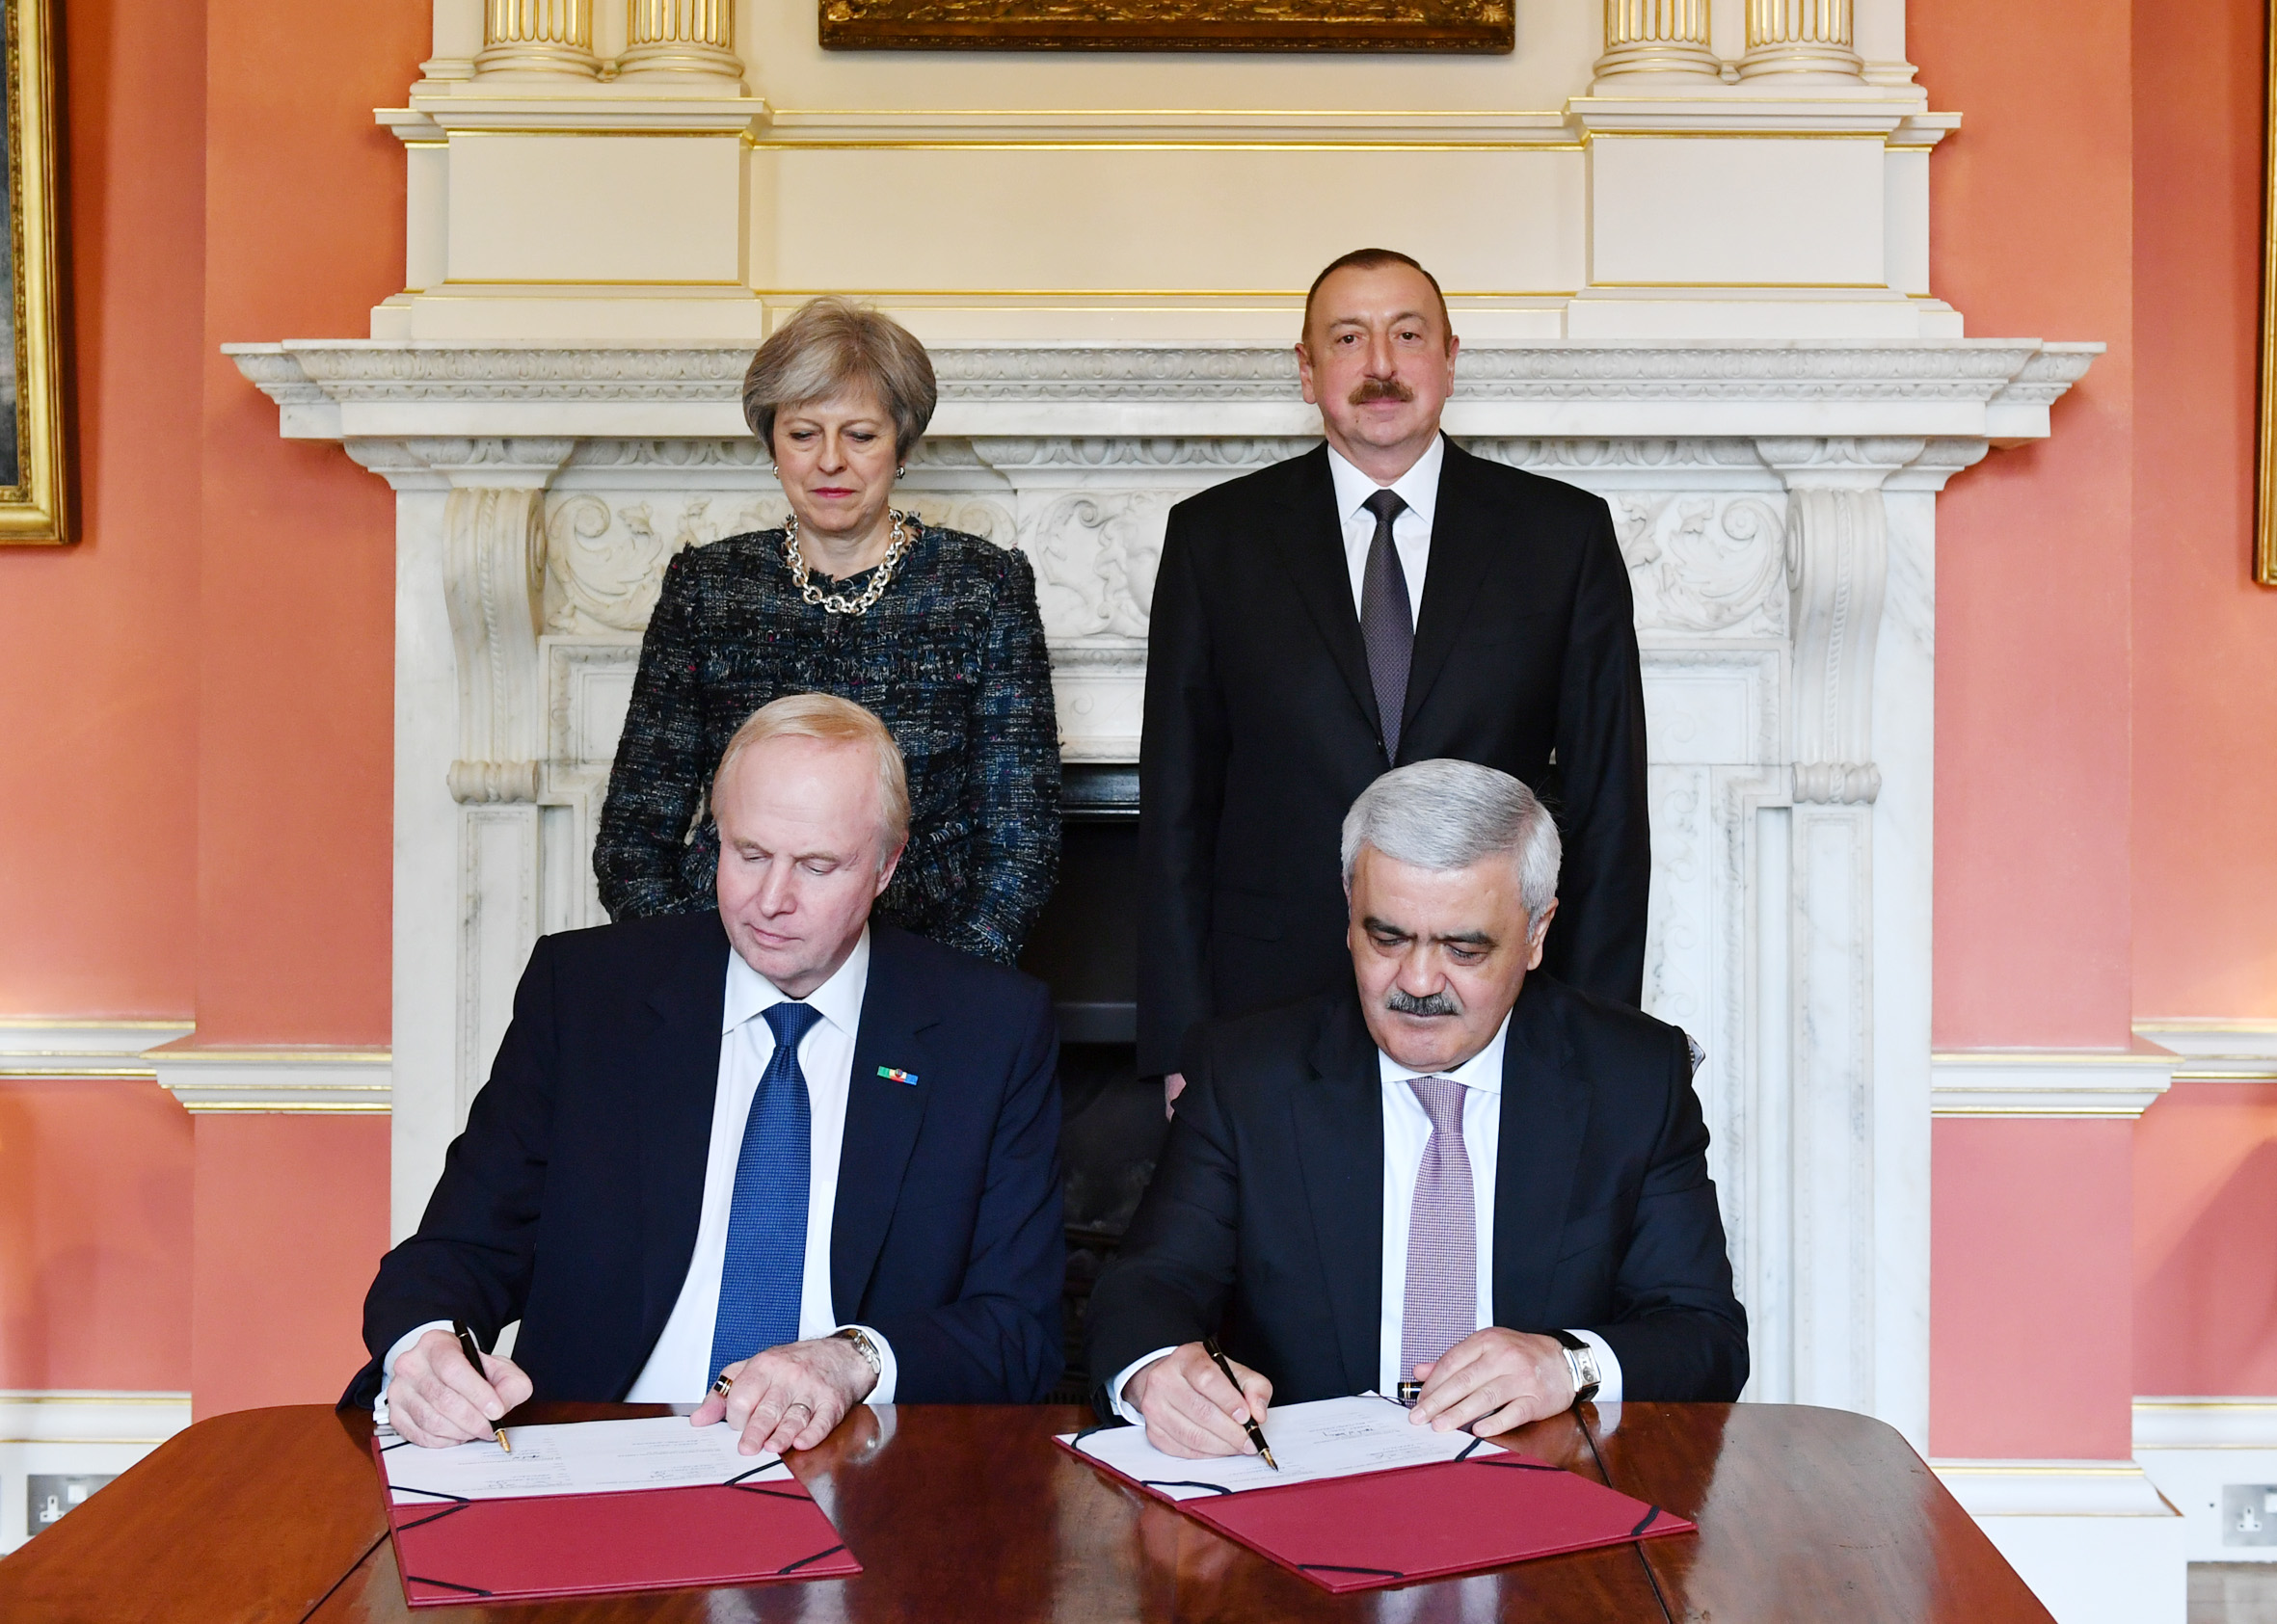 BP group chief executive Bob Dudley (seated, left) and SOCAR president Rovnag Abdullayev (seated, right) sign a new production sharing agreement as UK Prime Minister Theresa May and Azerbaijani President Ilham Aliyev look on.